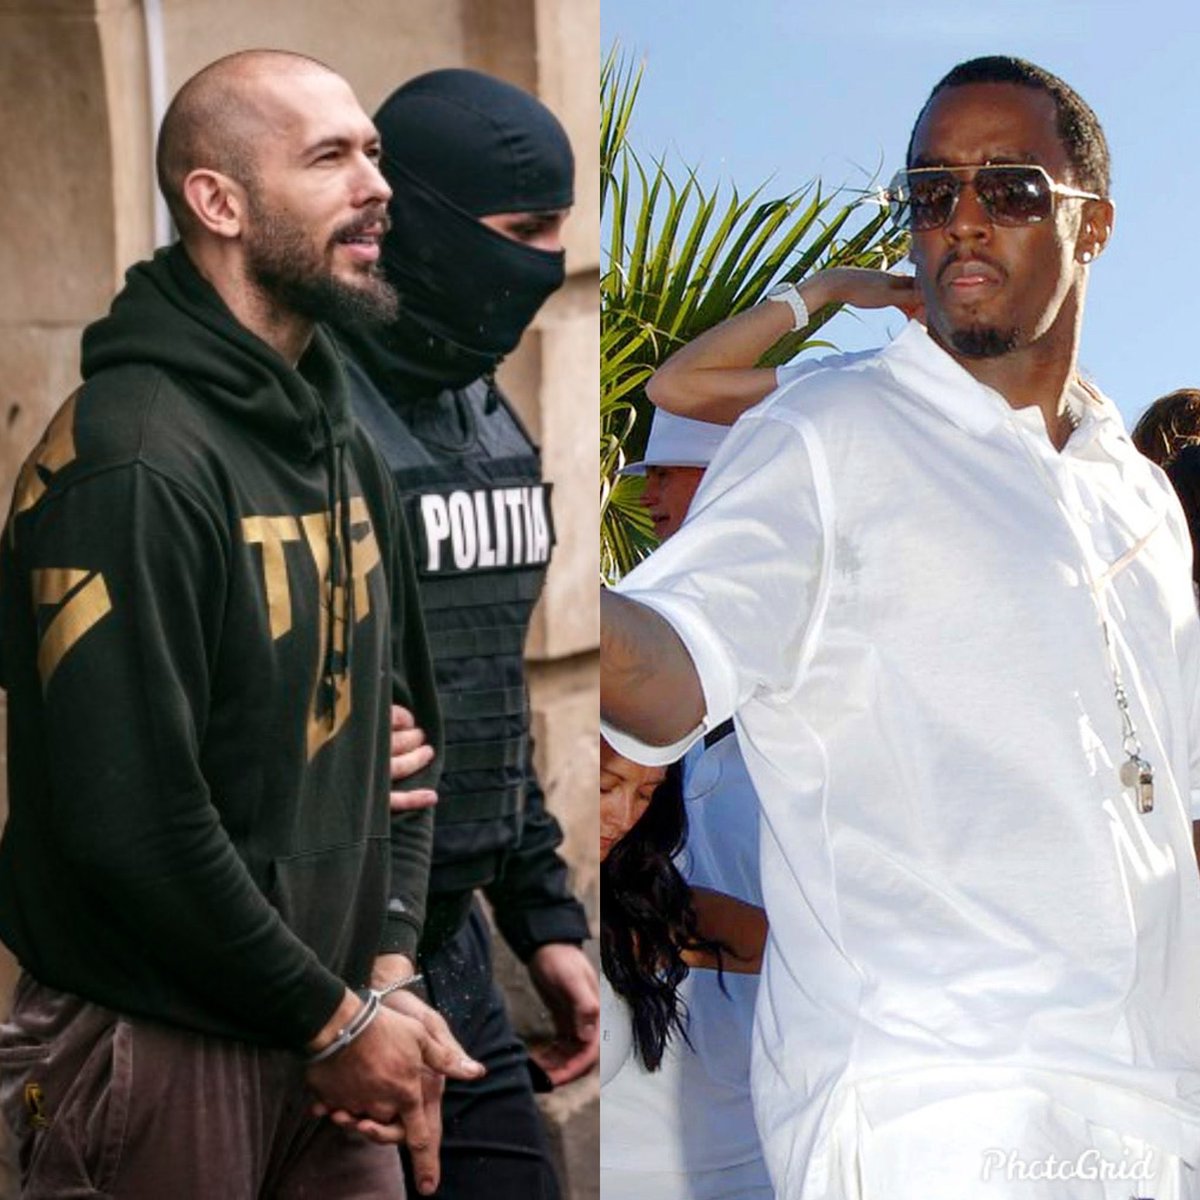 Tate has now been having to deal with the Romanian legal system for close to 2 years now…

Diddy the booty bandit got raided by the feds and they actually have evidence on diddy!

Andrew Tate is innocent and there is no evidence against him but is still under some form of arrest